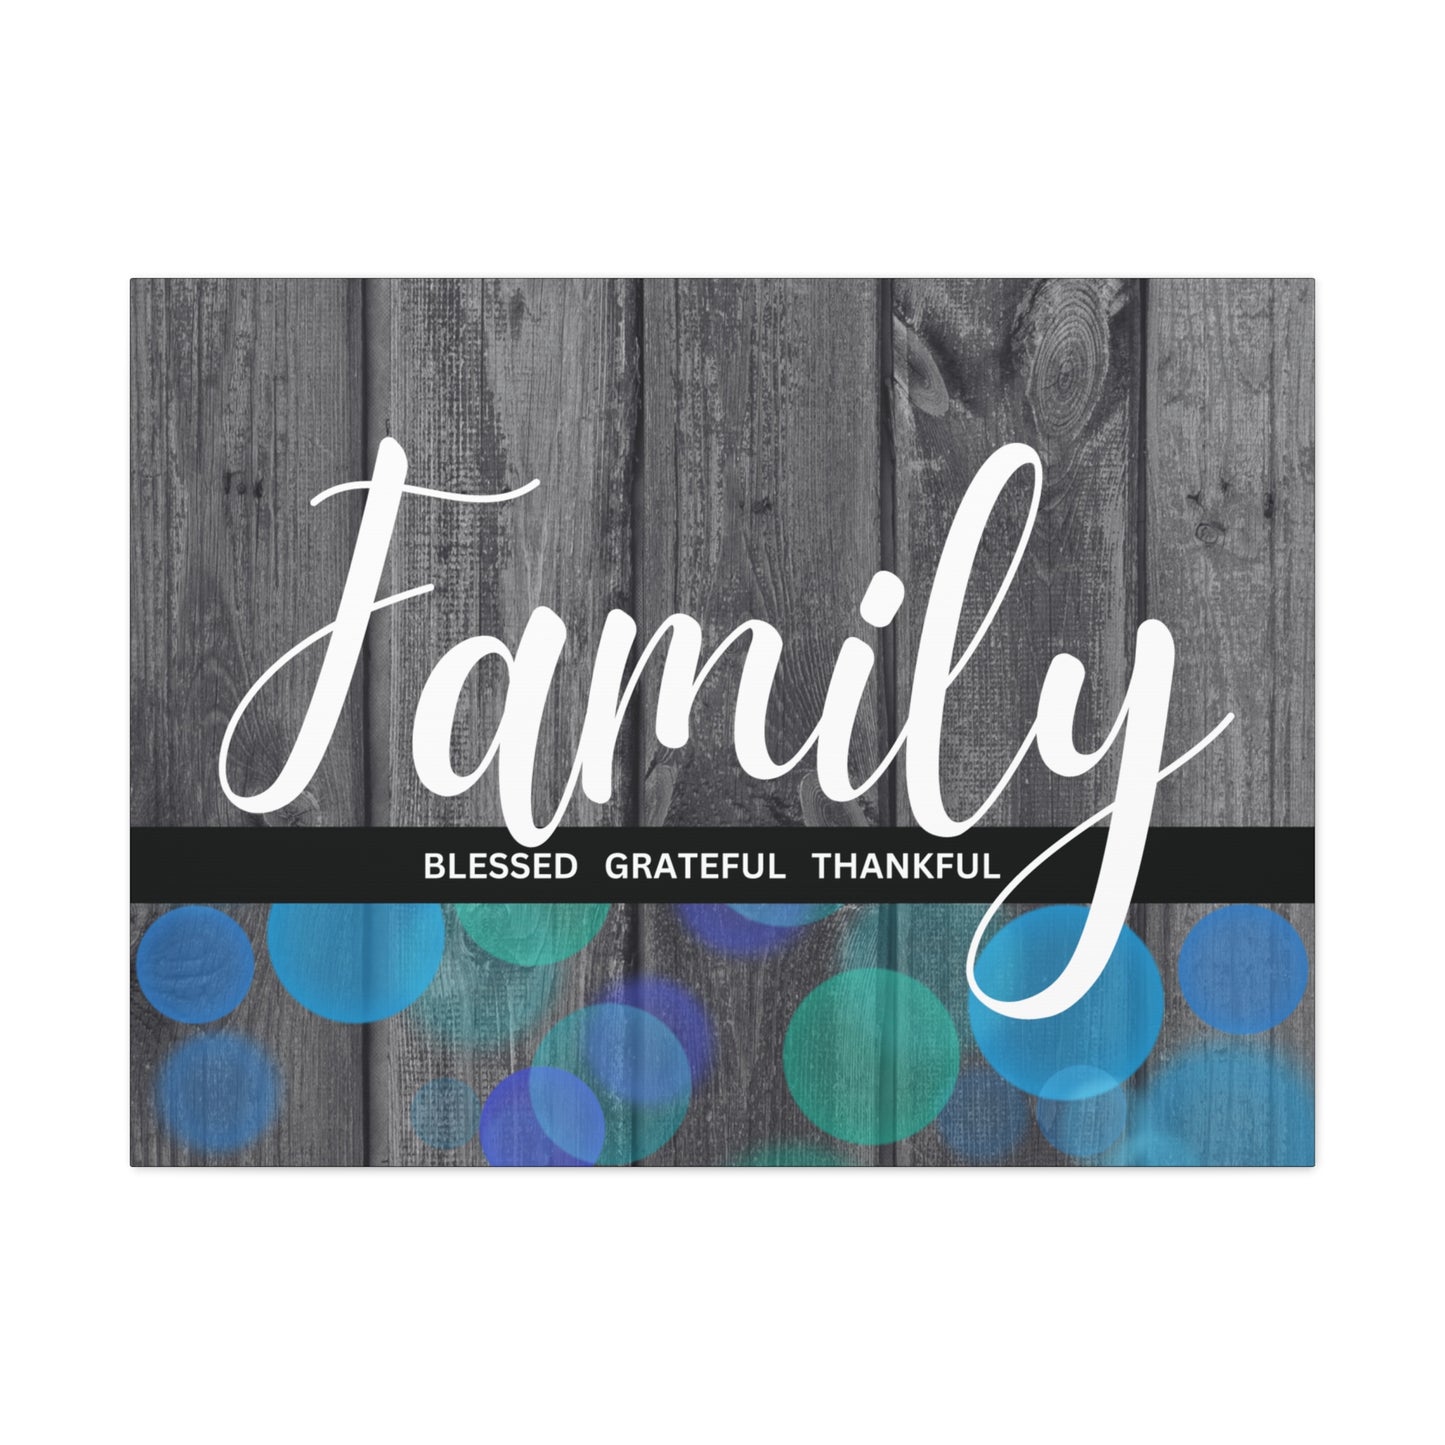 Christian Wall Art: Family, Blessed, Grateful, Thankful (Wood Frame Ready to Hang)